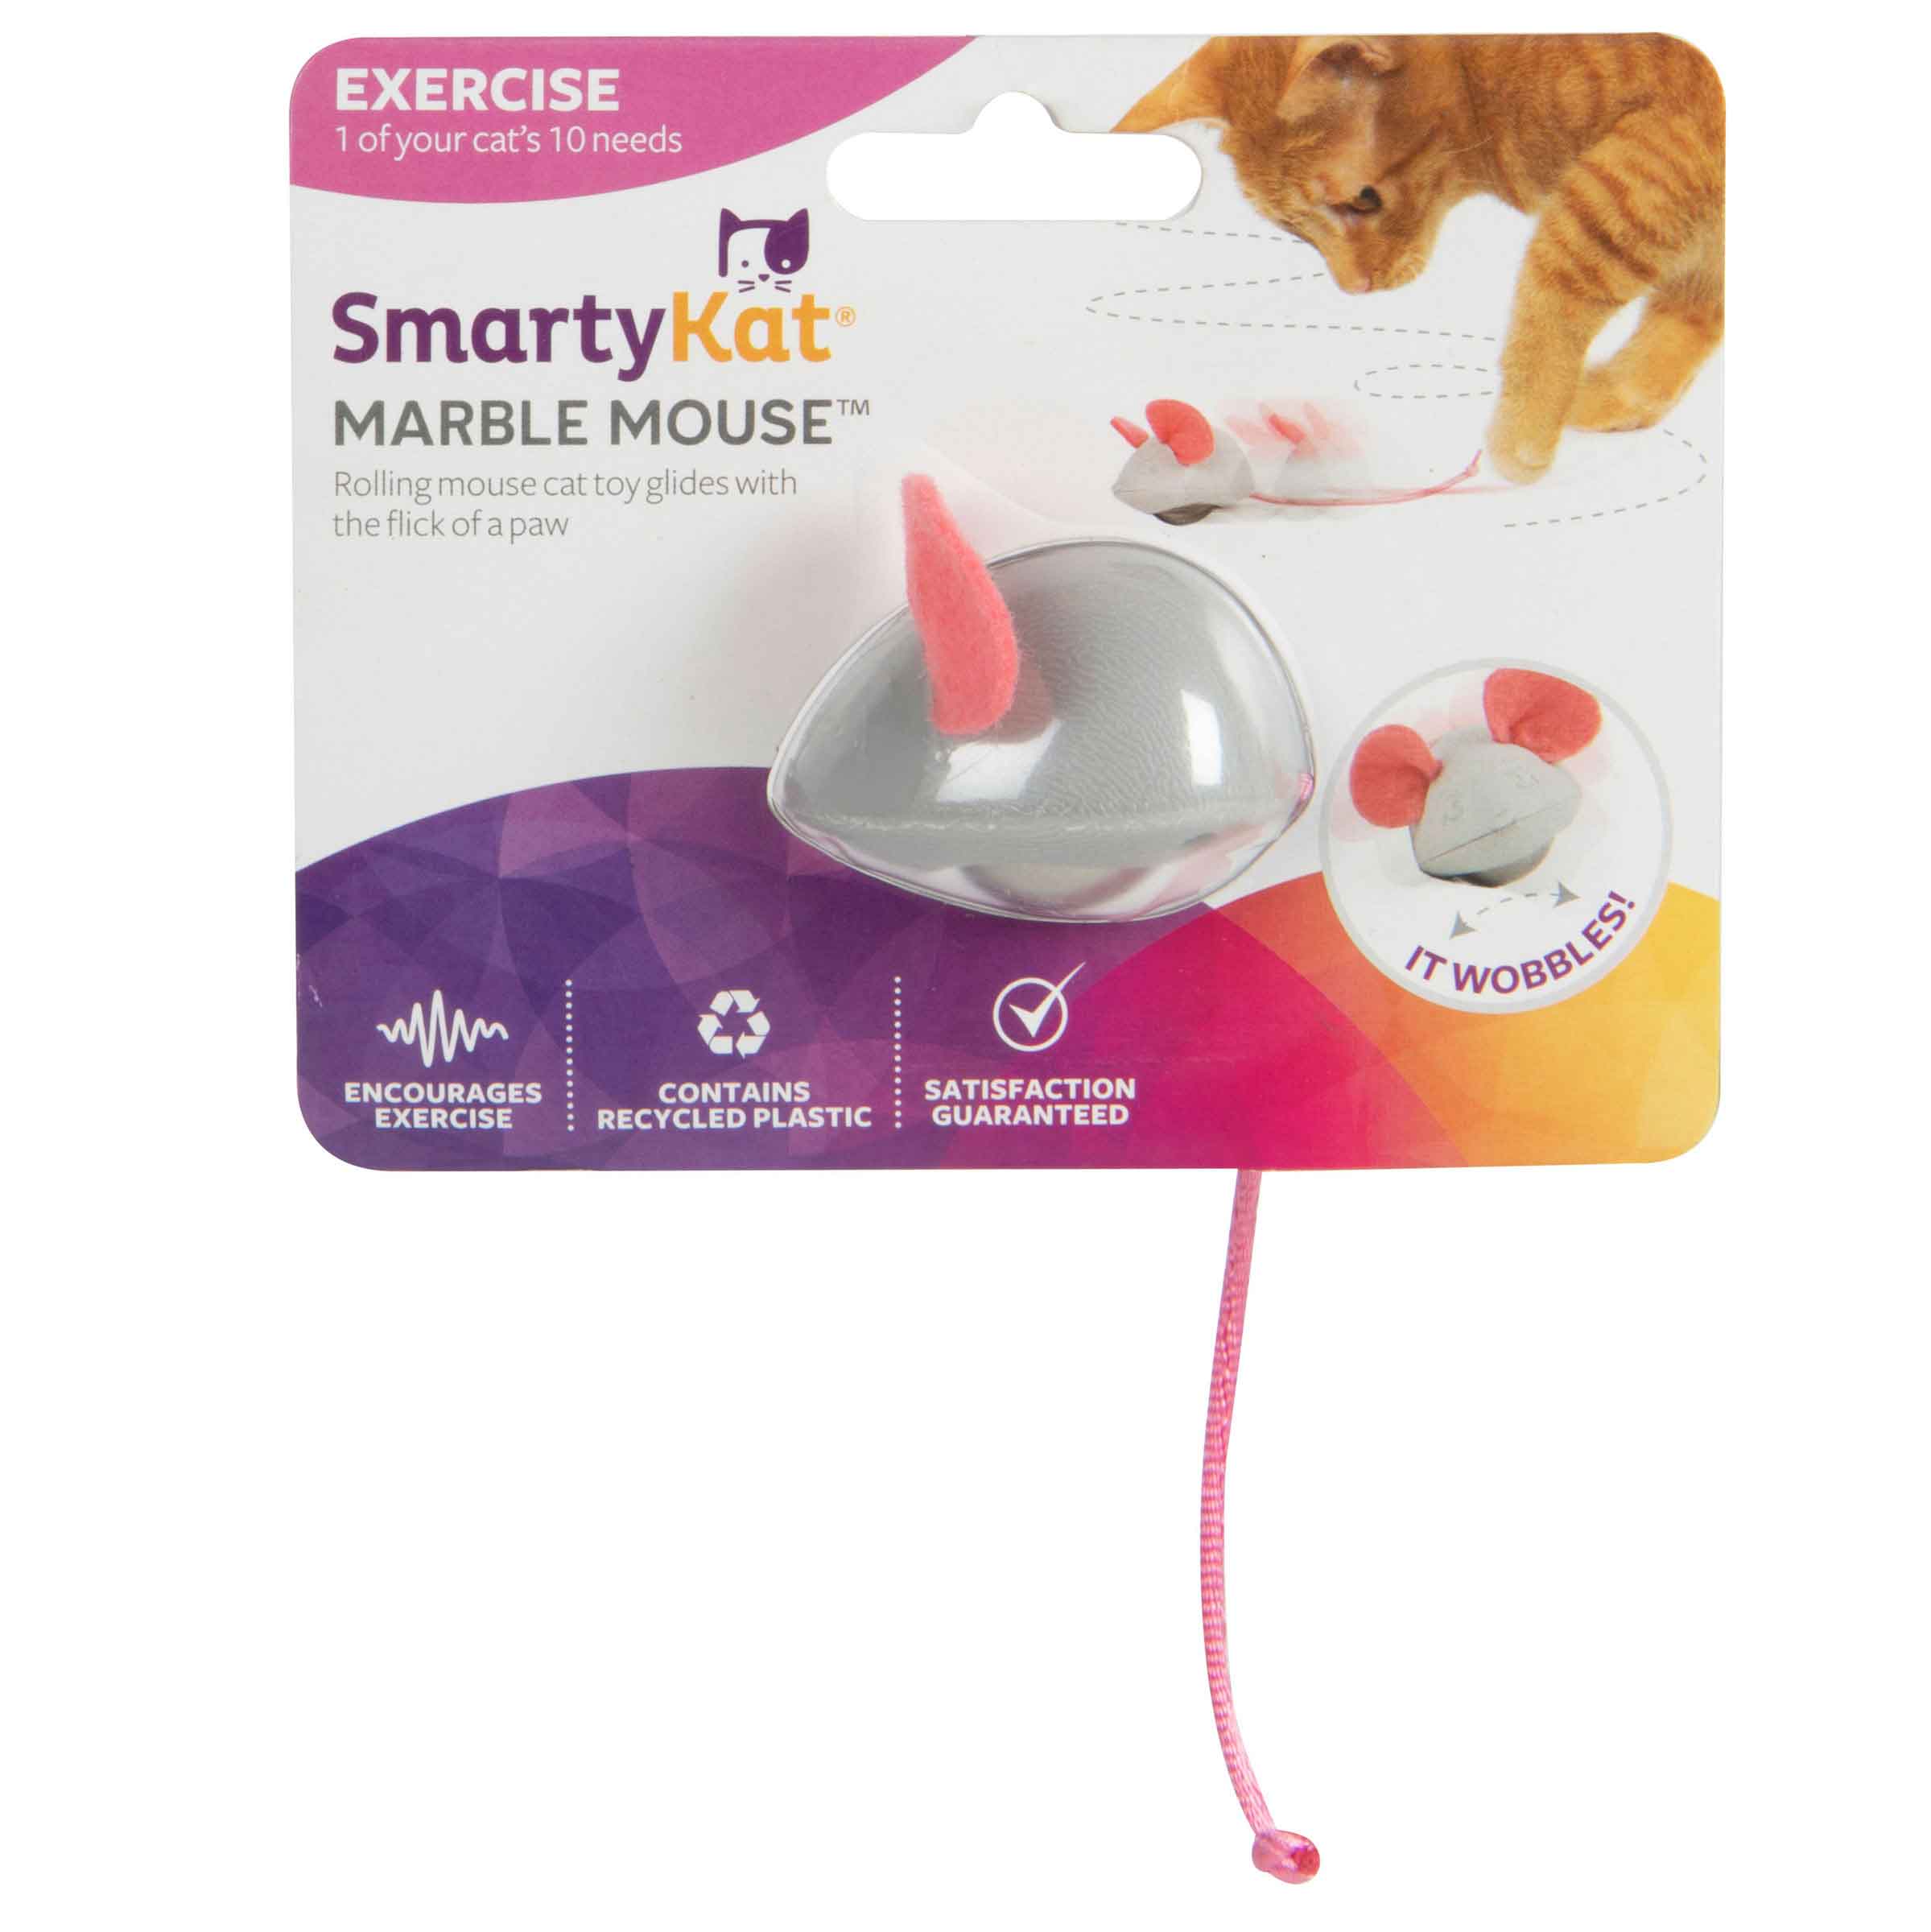 SmartyKat Marble Mouse Rolling Marble Cat Toy